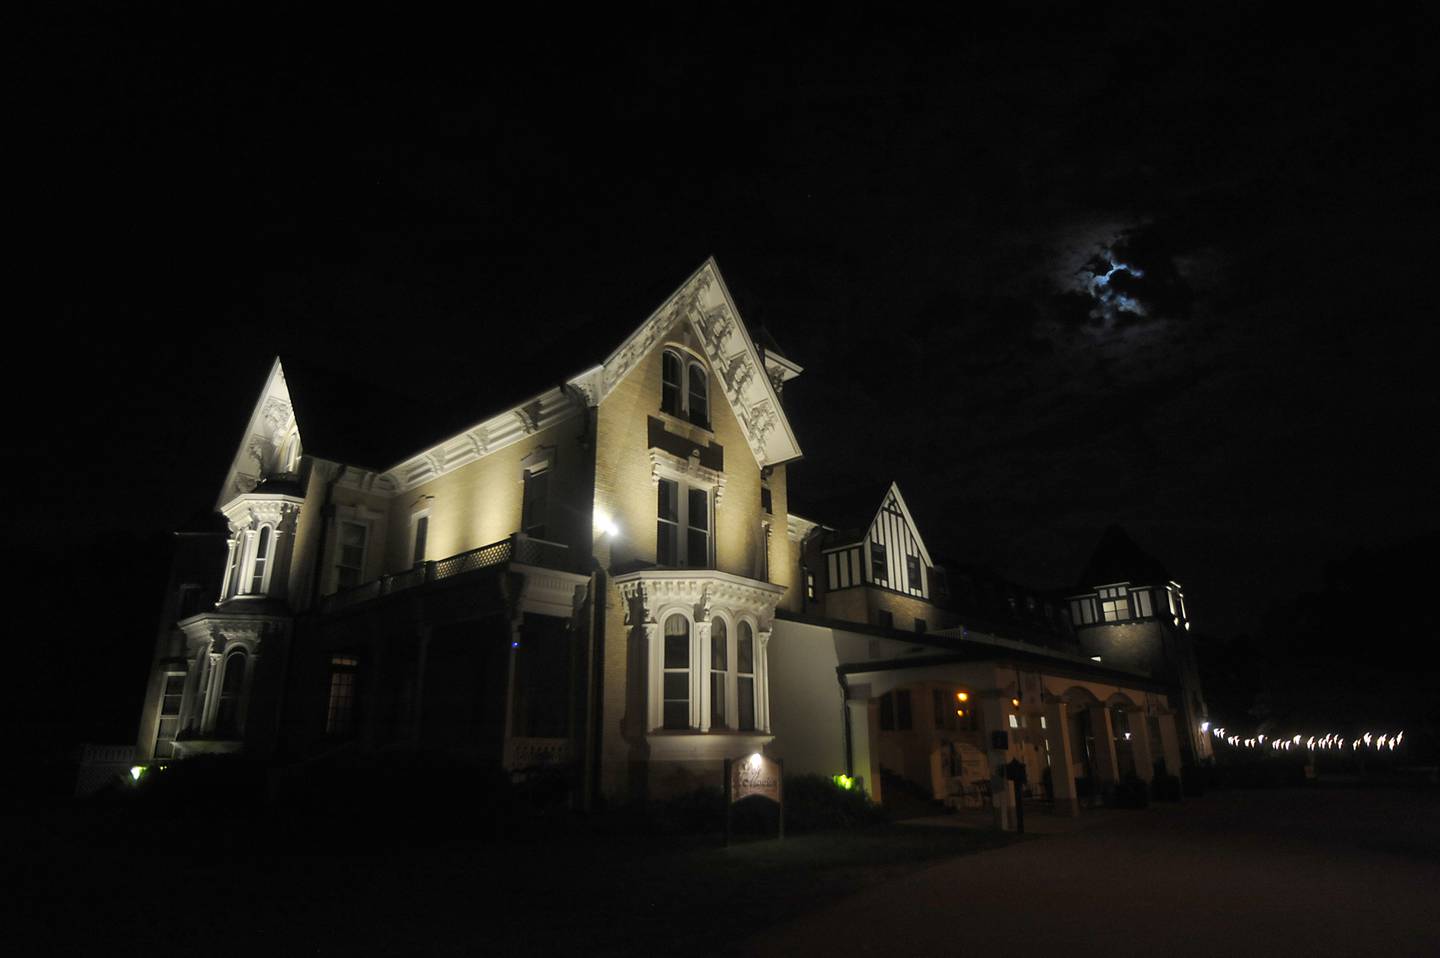 Located on Crystal Lake's 401 Country Club Road, the Doll Mansion is in the moonlight before Lauren Purcell's paranormal tour begins. Purcell will guide you through the three floors of the original building and provide a historic anecdote through the lens of a spirit visit. Guests will use pendulum crystals and dowsing rods as part of the tour to experience the visit.